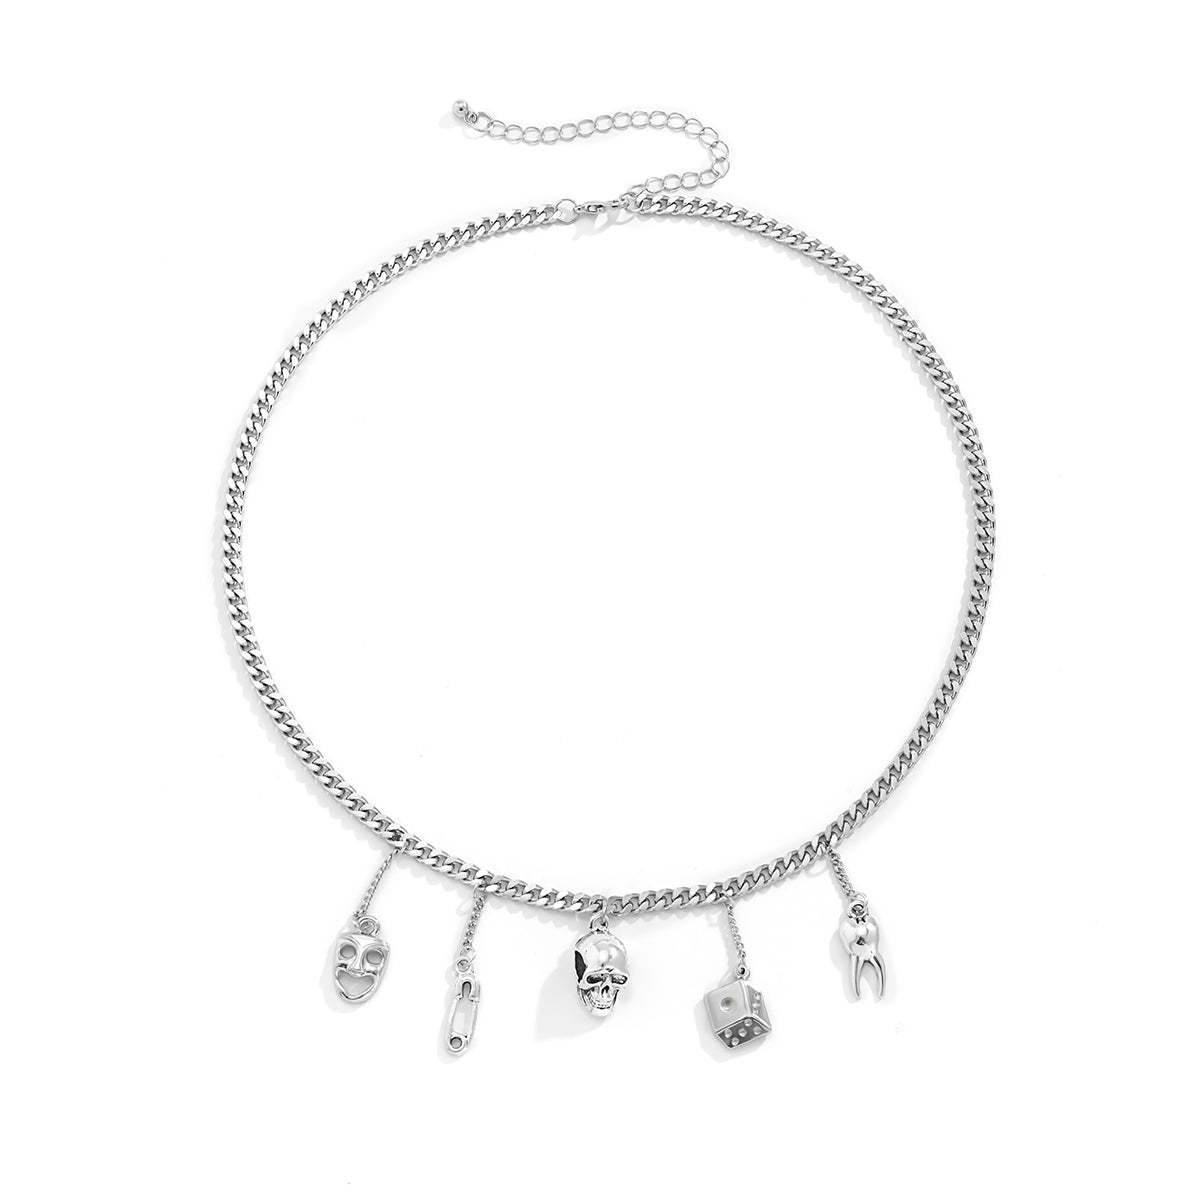 Silver-Plated Skull Charm Necklace